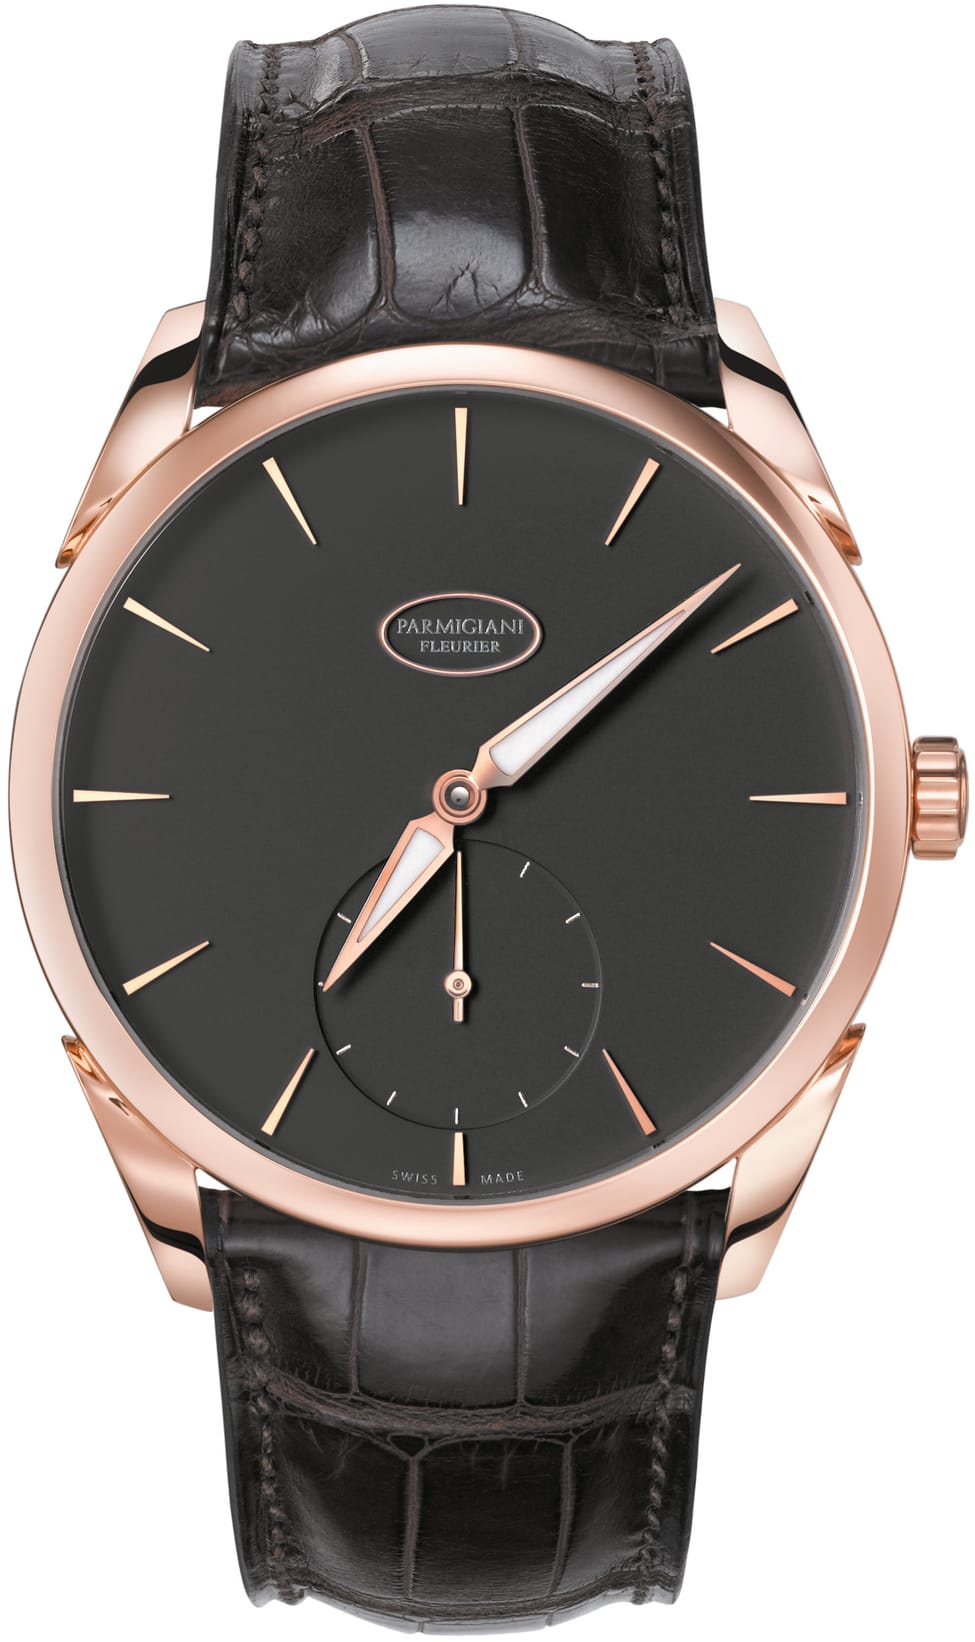 Tonda 1950 42mm Automatic in Rose Gold on Black Crocodile Leather Strap with Black Dial